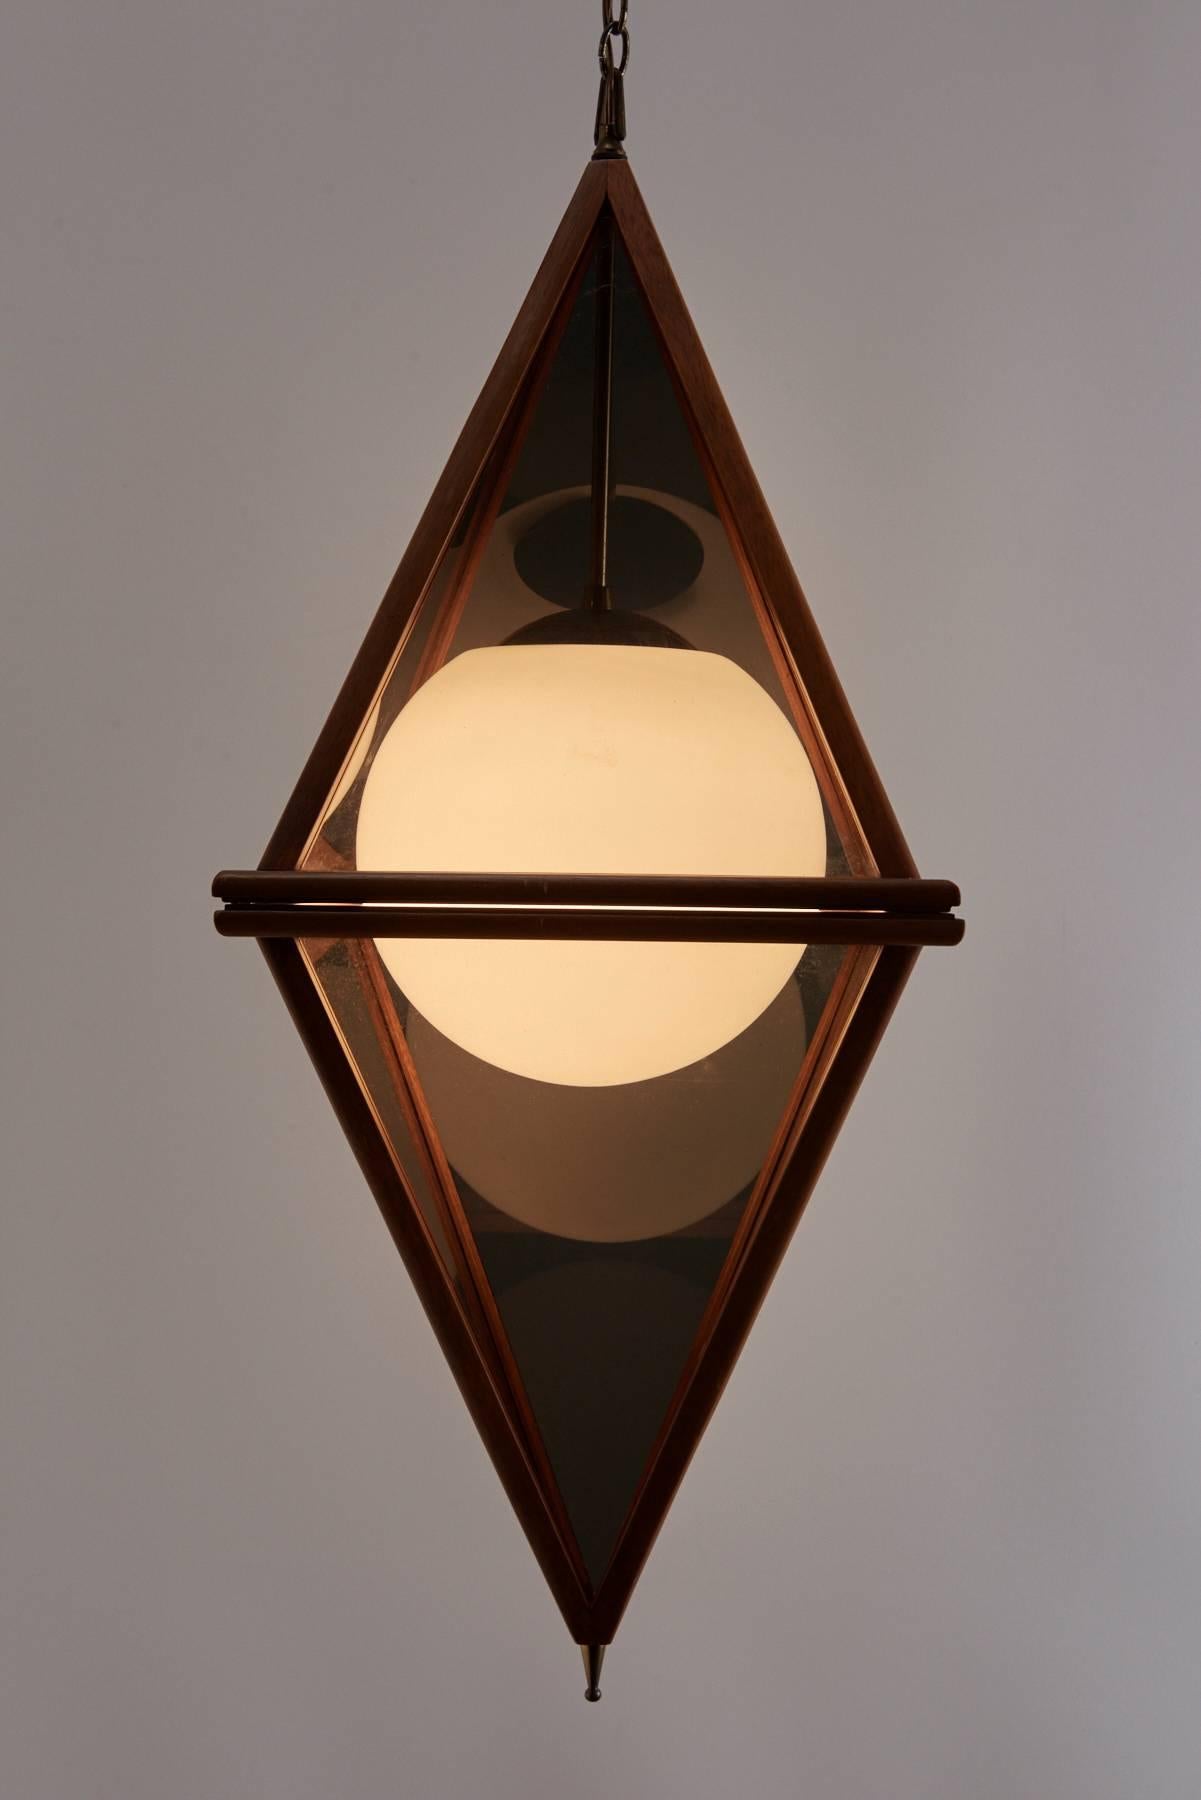 Diamond shaped pendant lamp with teak frame, smoked acrylic panels, opaque glass globe and brass detailing. Brass chain measures approximately 15 feet. Beautiful mid-century styling.